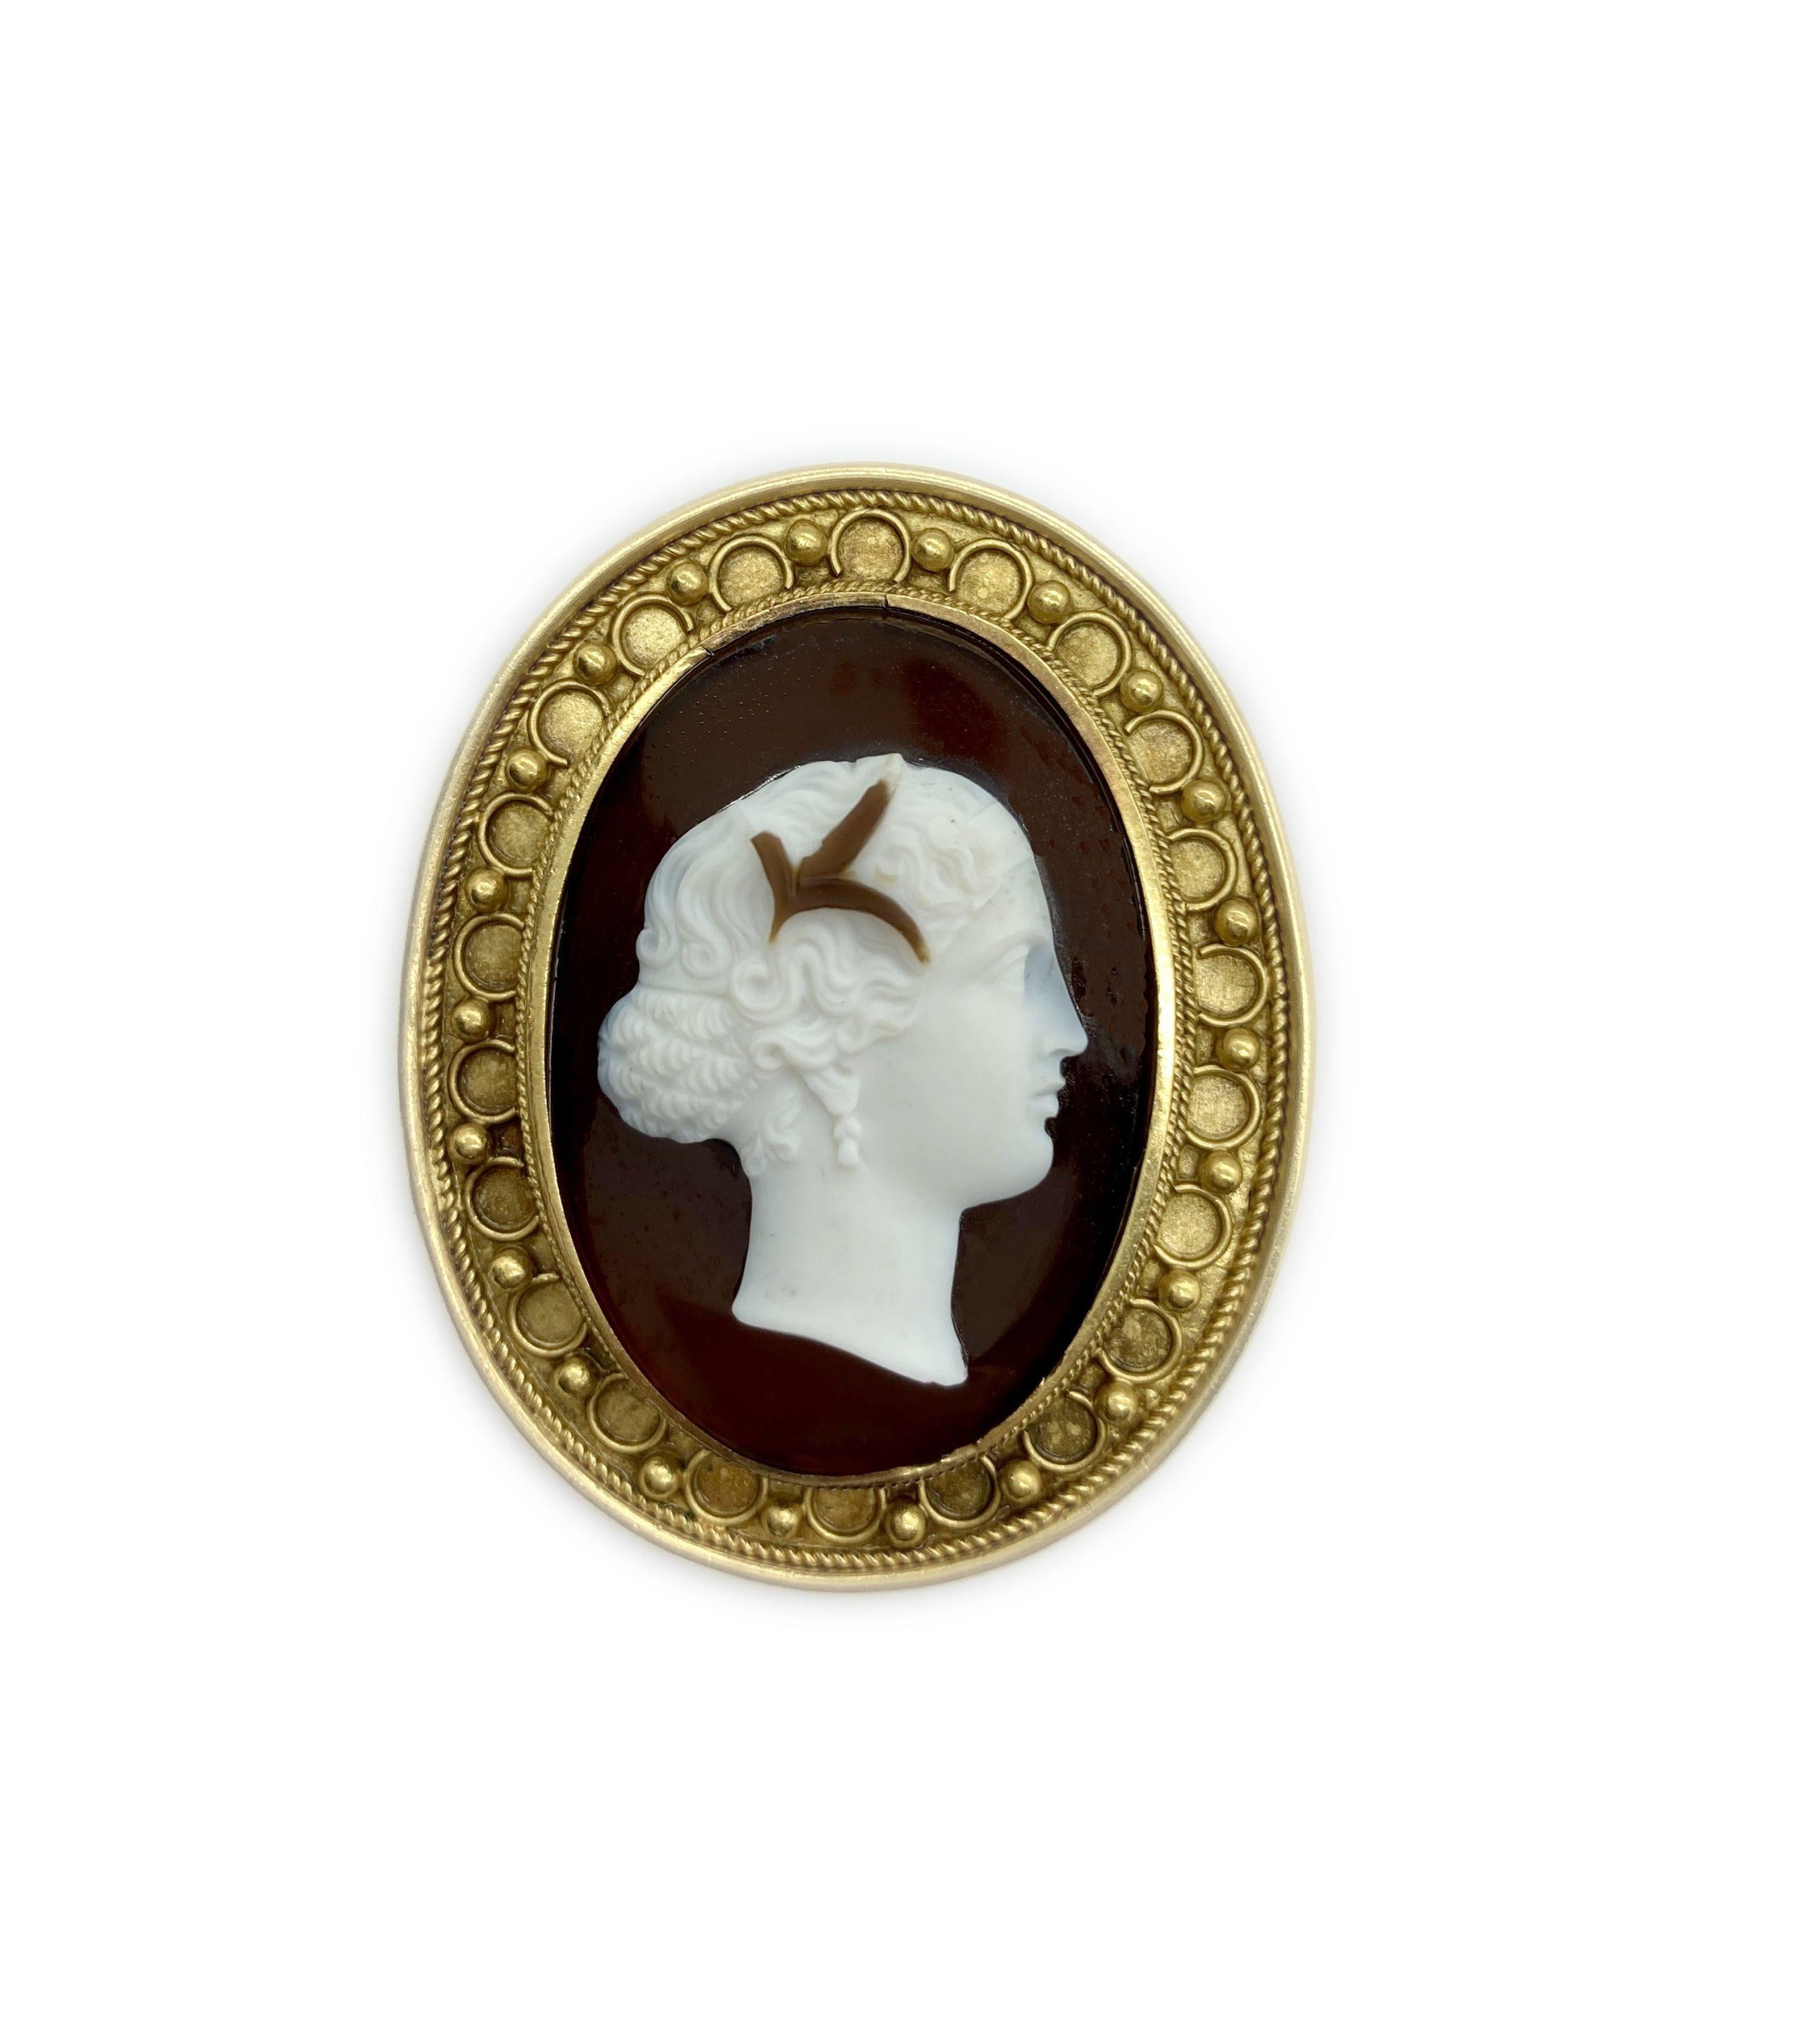 An antique agate cameo depicting the profile of a lady, encircled with gold granulation in the Etruscan archaeological revival style.